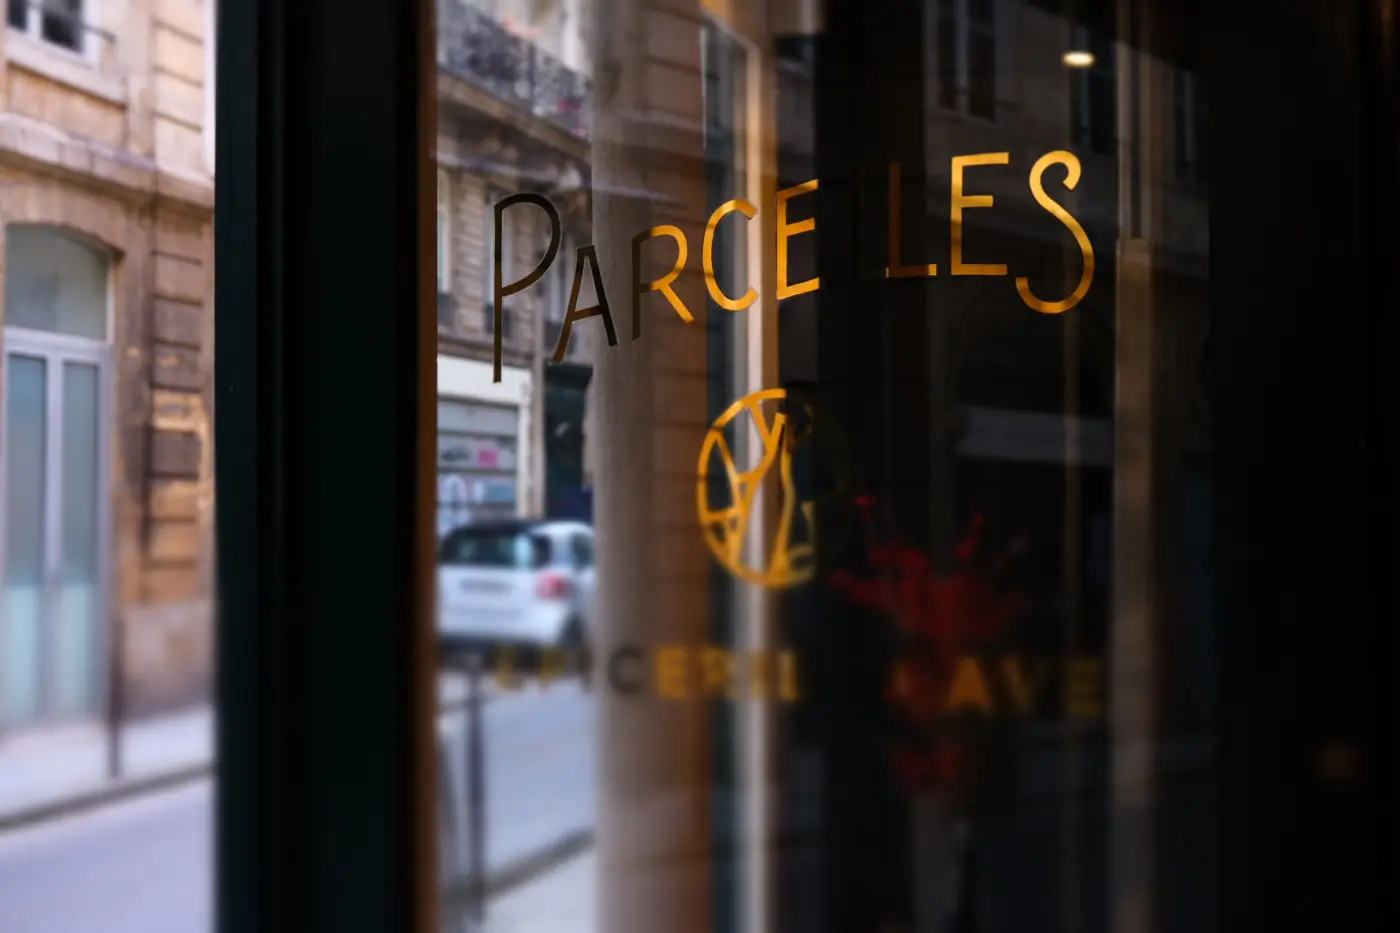 View through the glass window of Parcelles in Paris with the restaurant's name in gold lettering, reflecting the bustling street outside.